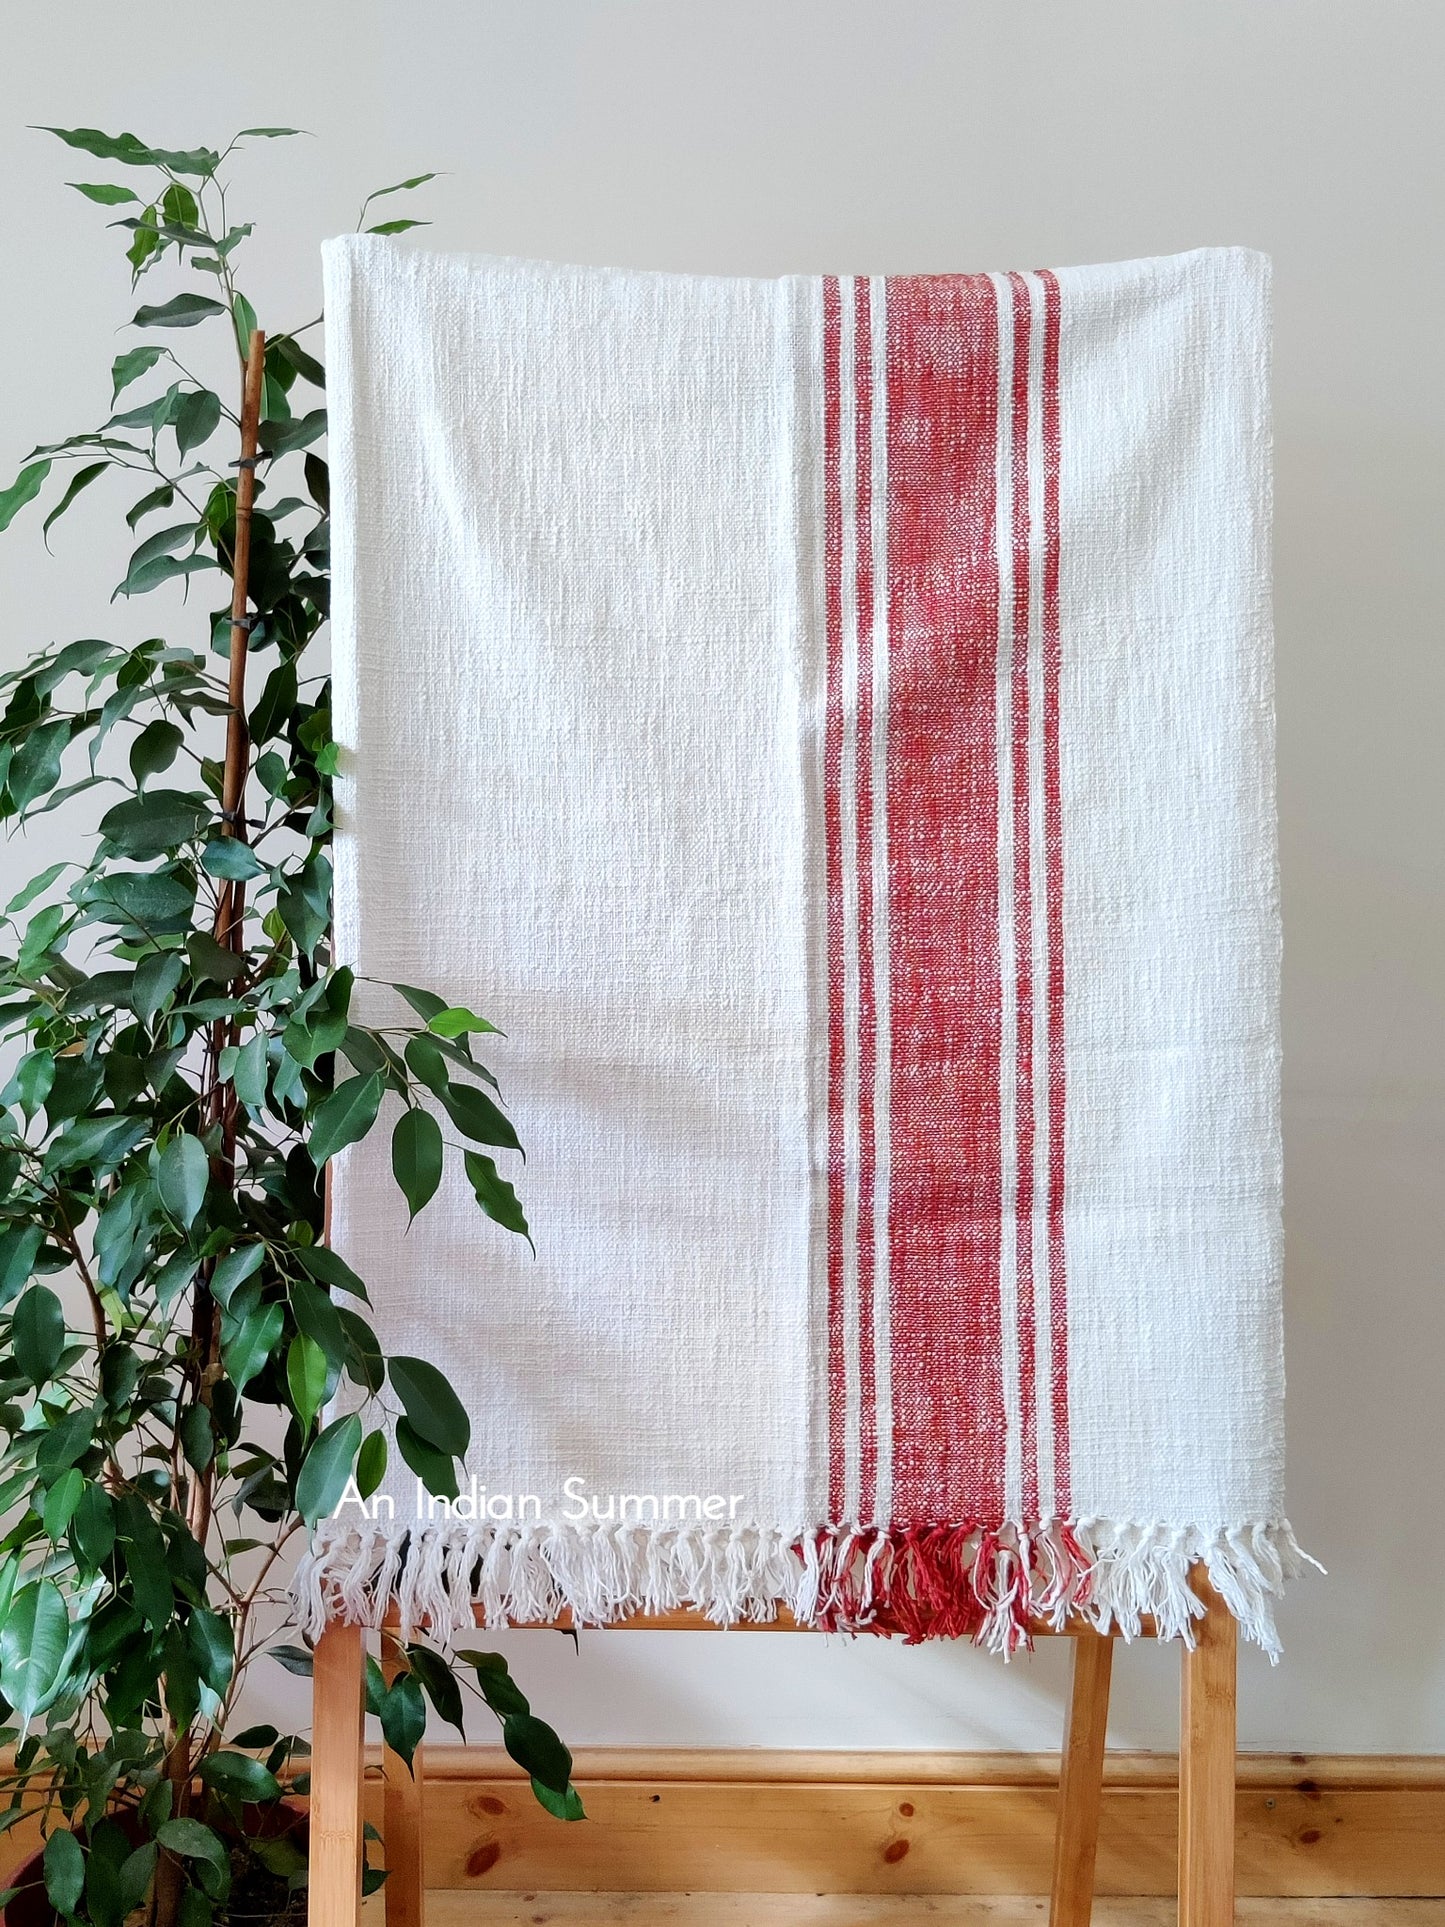 Rust Orange | French Stripe | Handwoven Khadi Cotton Throw | An Indian Summer | Seasonless Timeless Sustainable Ethical Authentic Artisan Conscious Clothing Lifestyle Brand